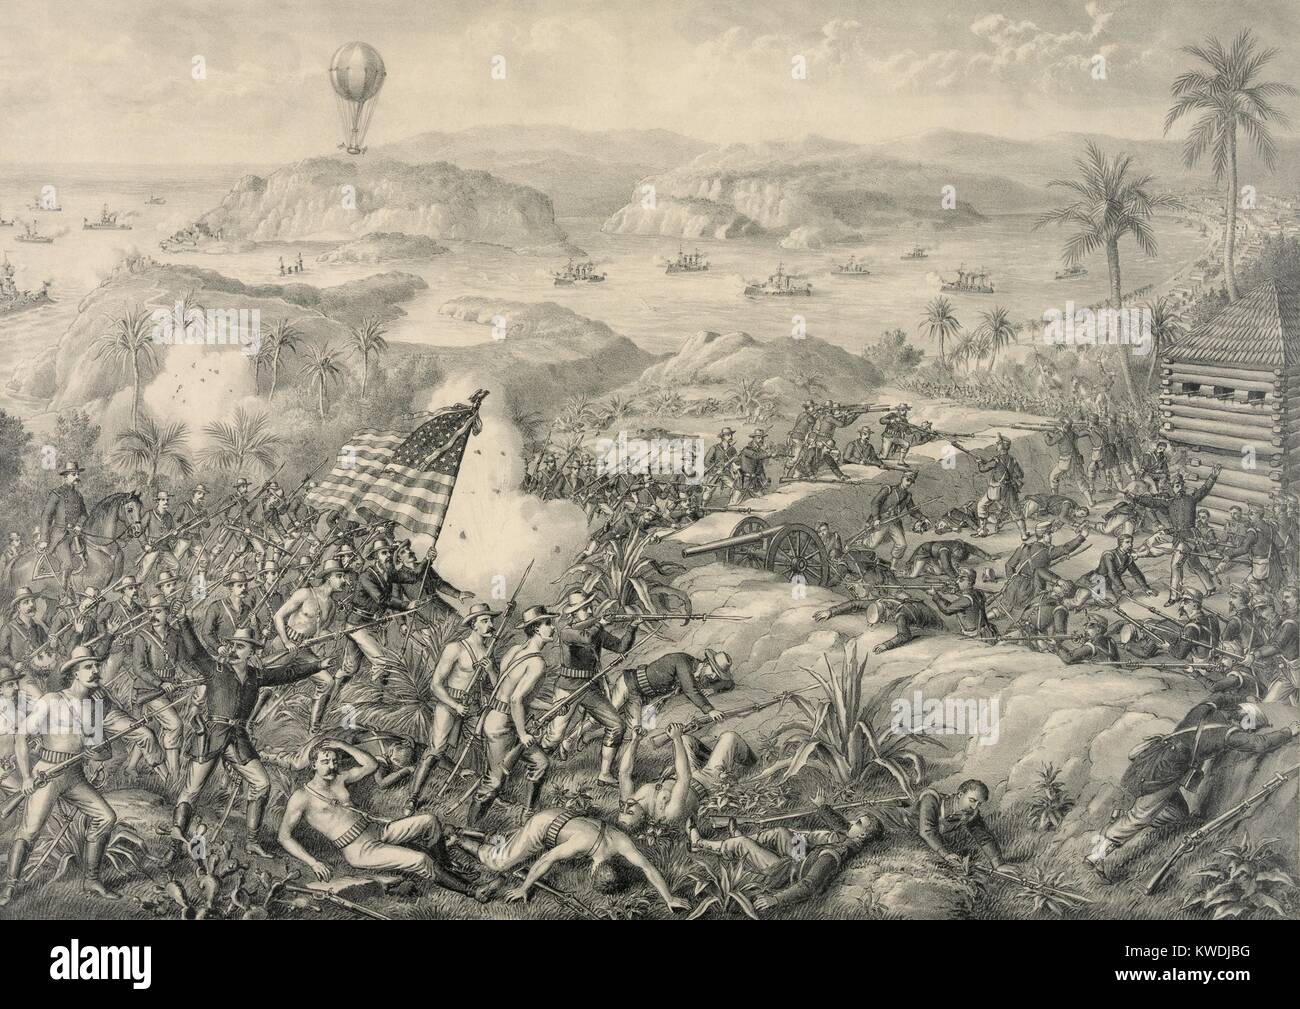 Battle of El Caney was fought on July 1, 1898, during the Spanish–American War in Cuba. US Forces captured the town and installations to support the main attack on the San Juan Heights. In the background are Spanish ships blockaded in the Santiago Bay by US Navy at far right. The US military used observation balloons during the Santiago Campaign (BSLOC 2017 10 29) Stock Photo